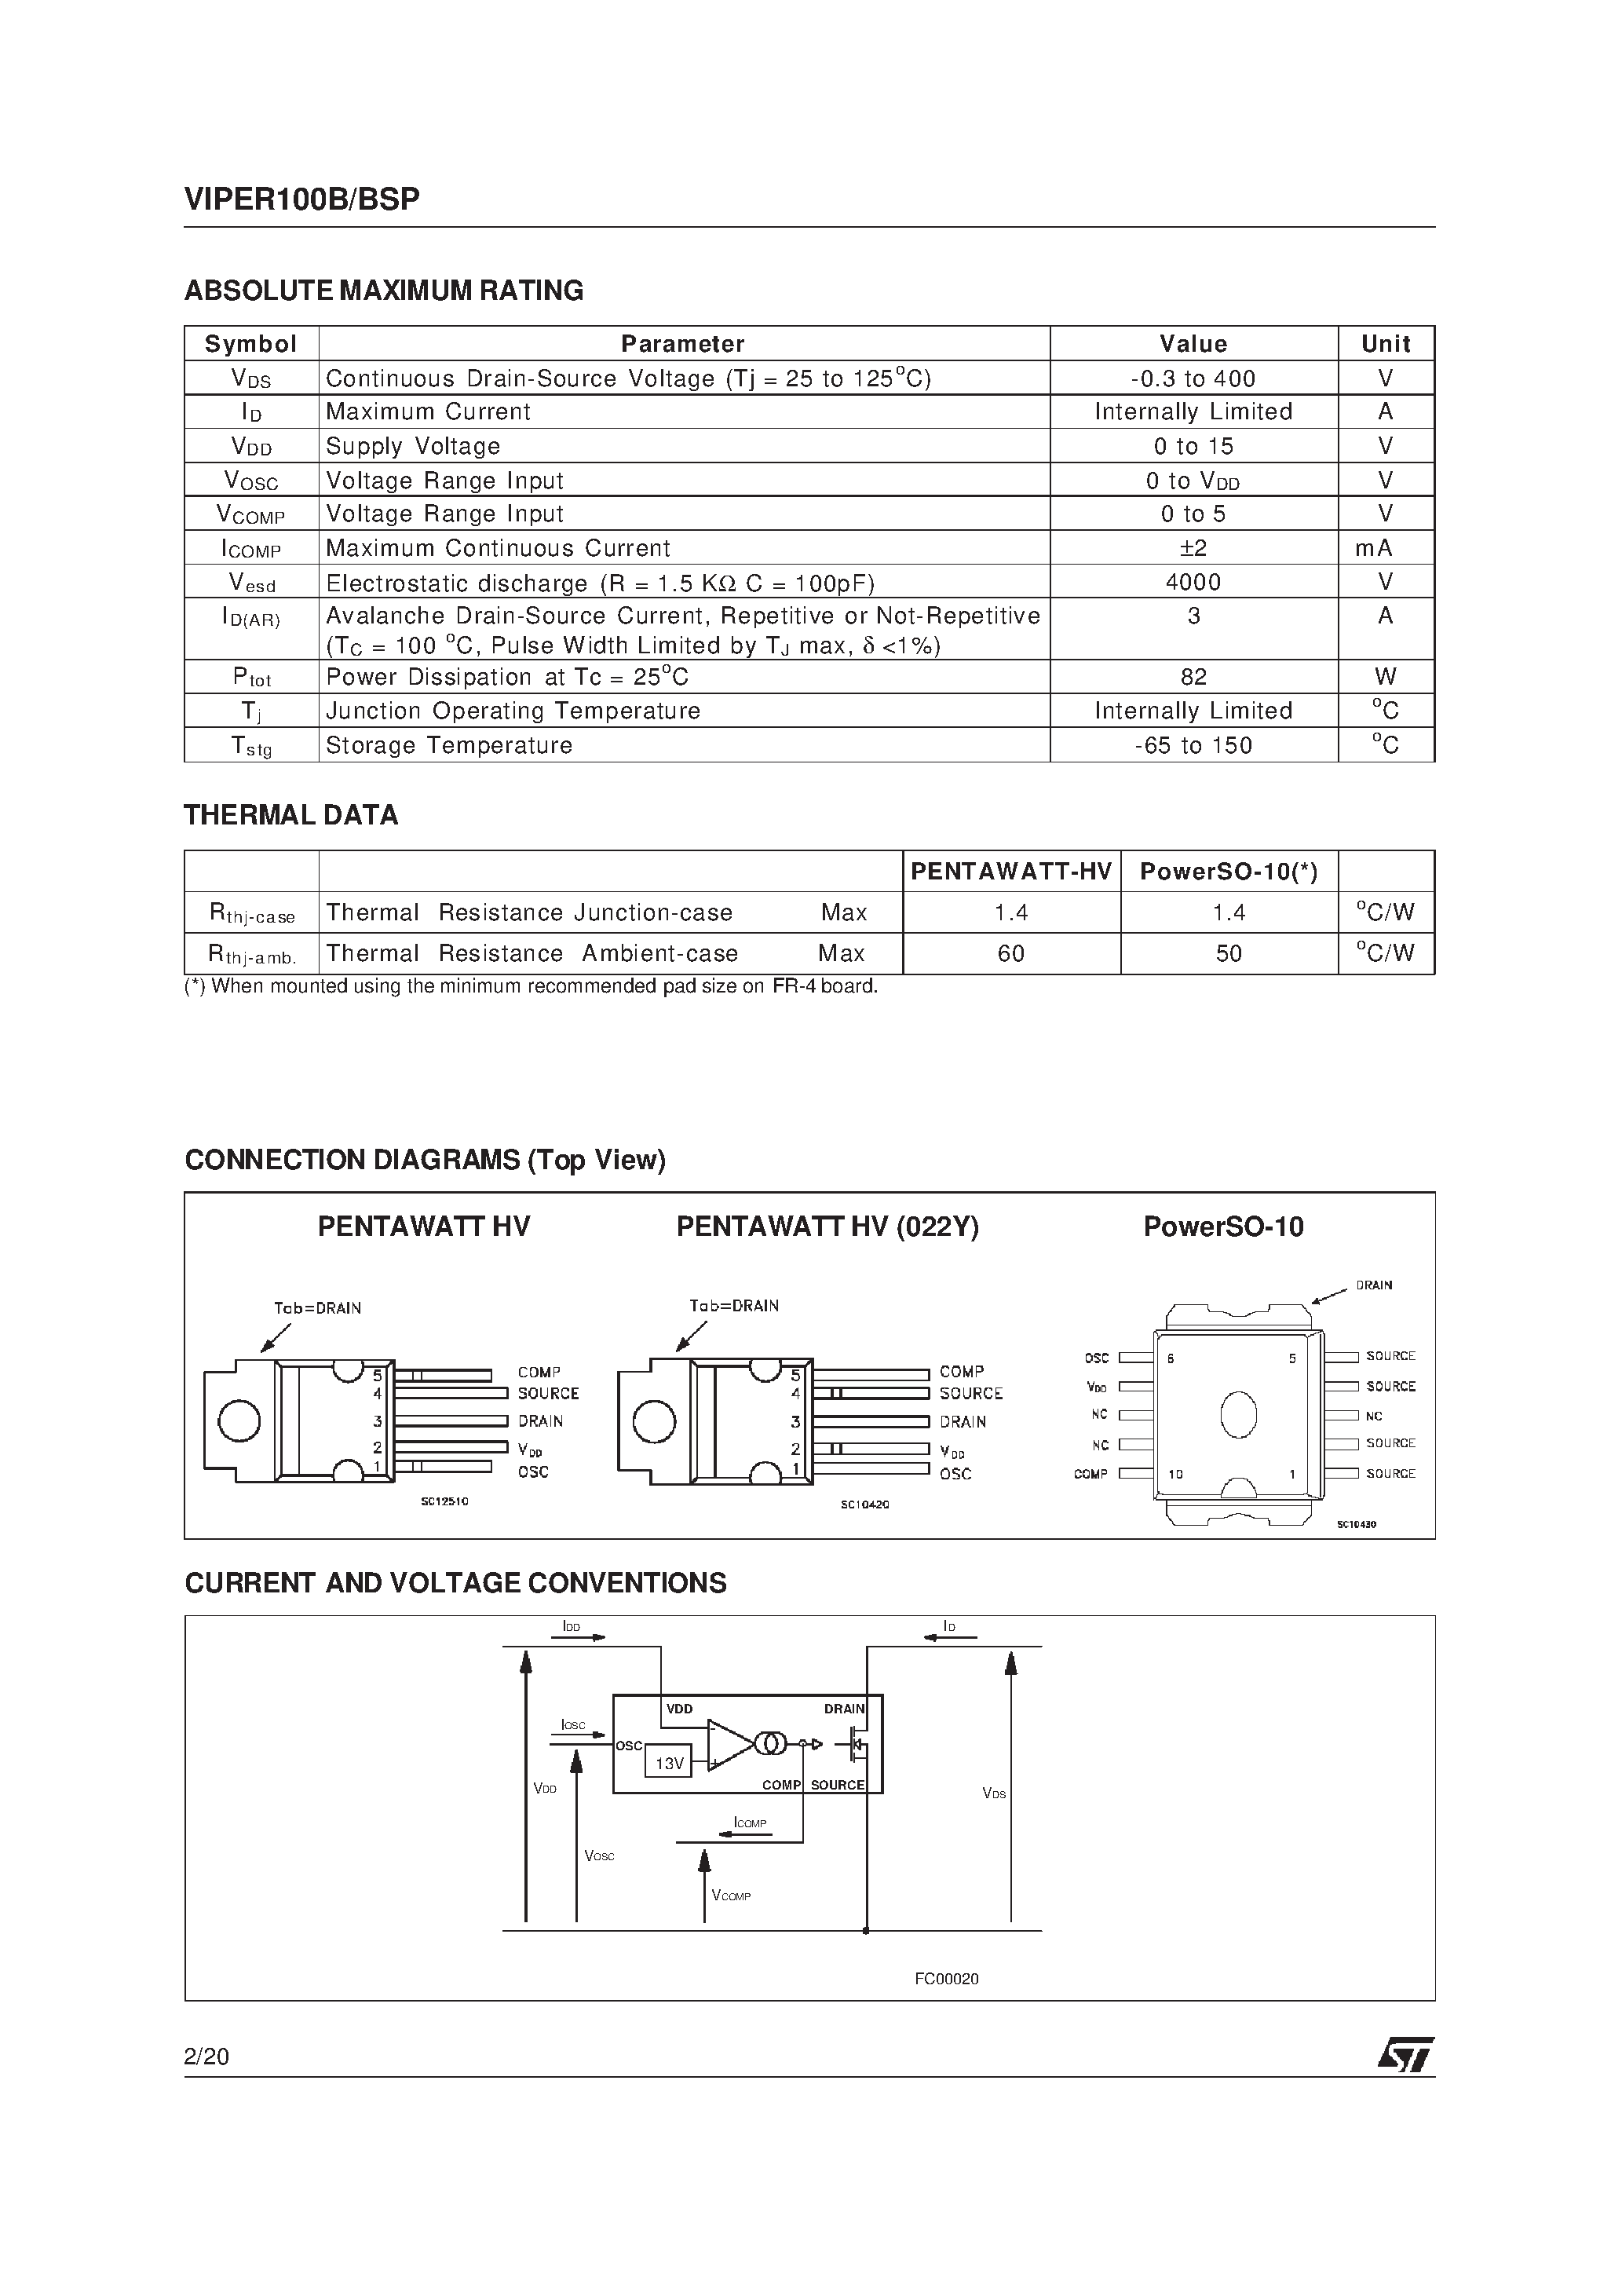 Datasheet VIPer100BSP - SMPS PRIMARY I.C. page 2